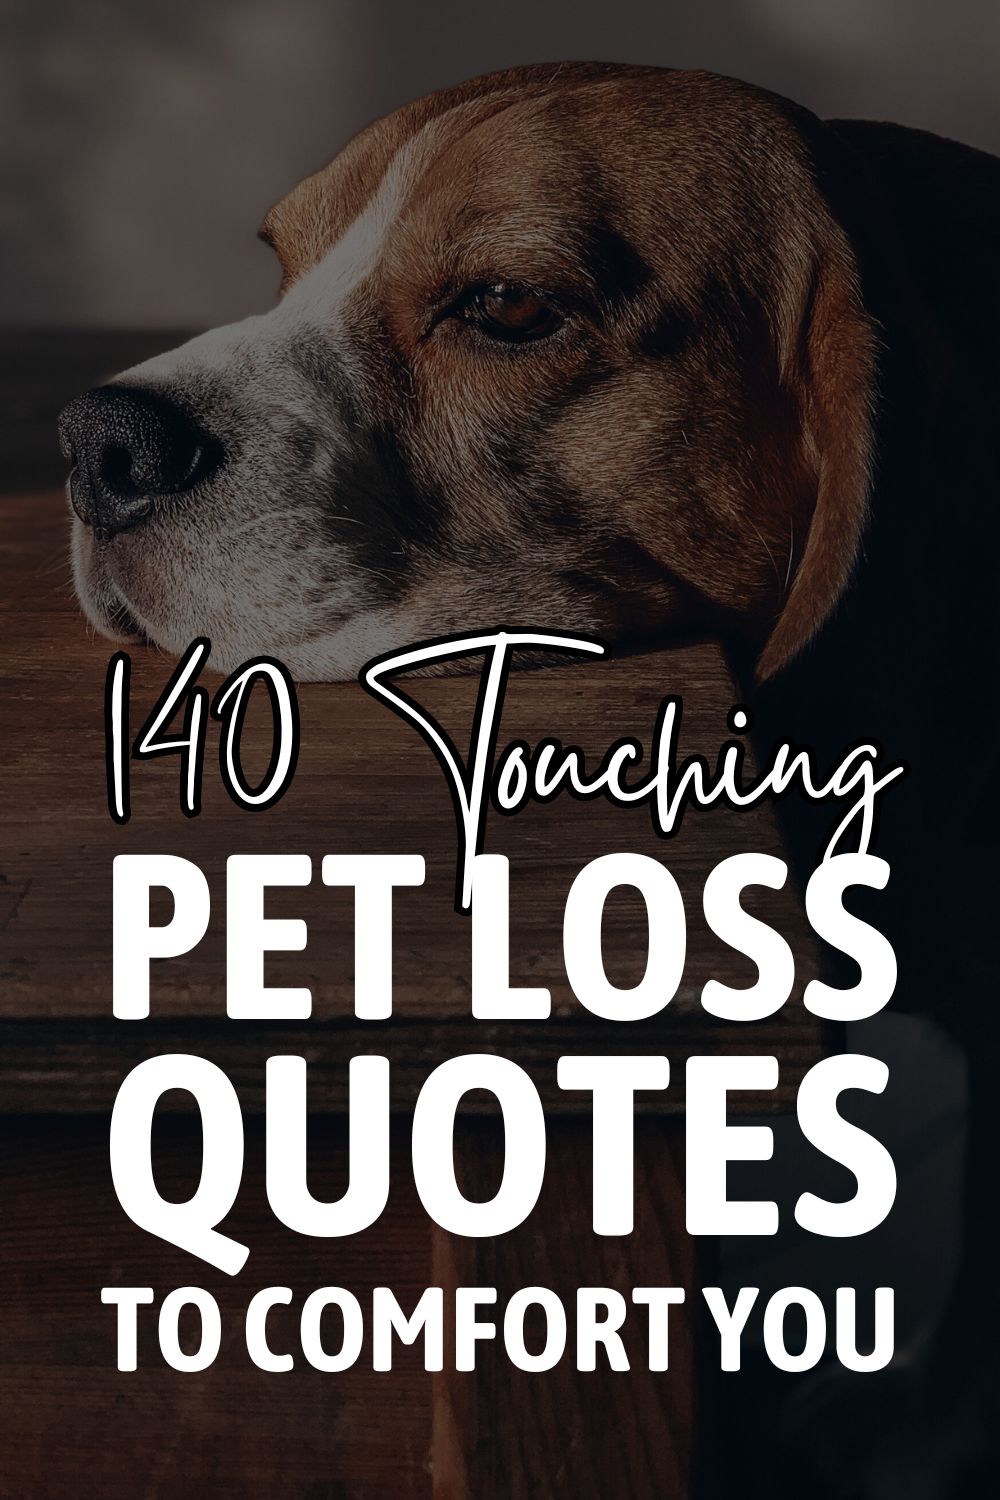 140 Heart-Touching Pet Loss Quotes To Console Your Grief